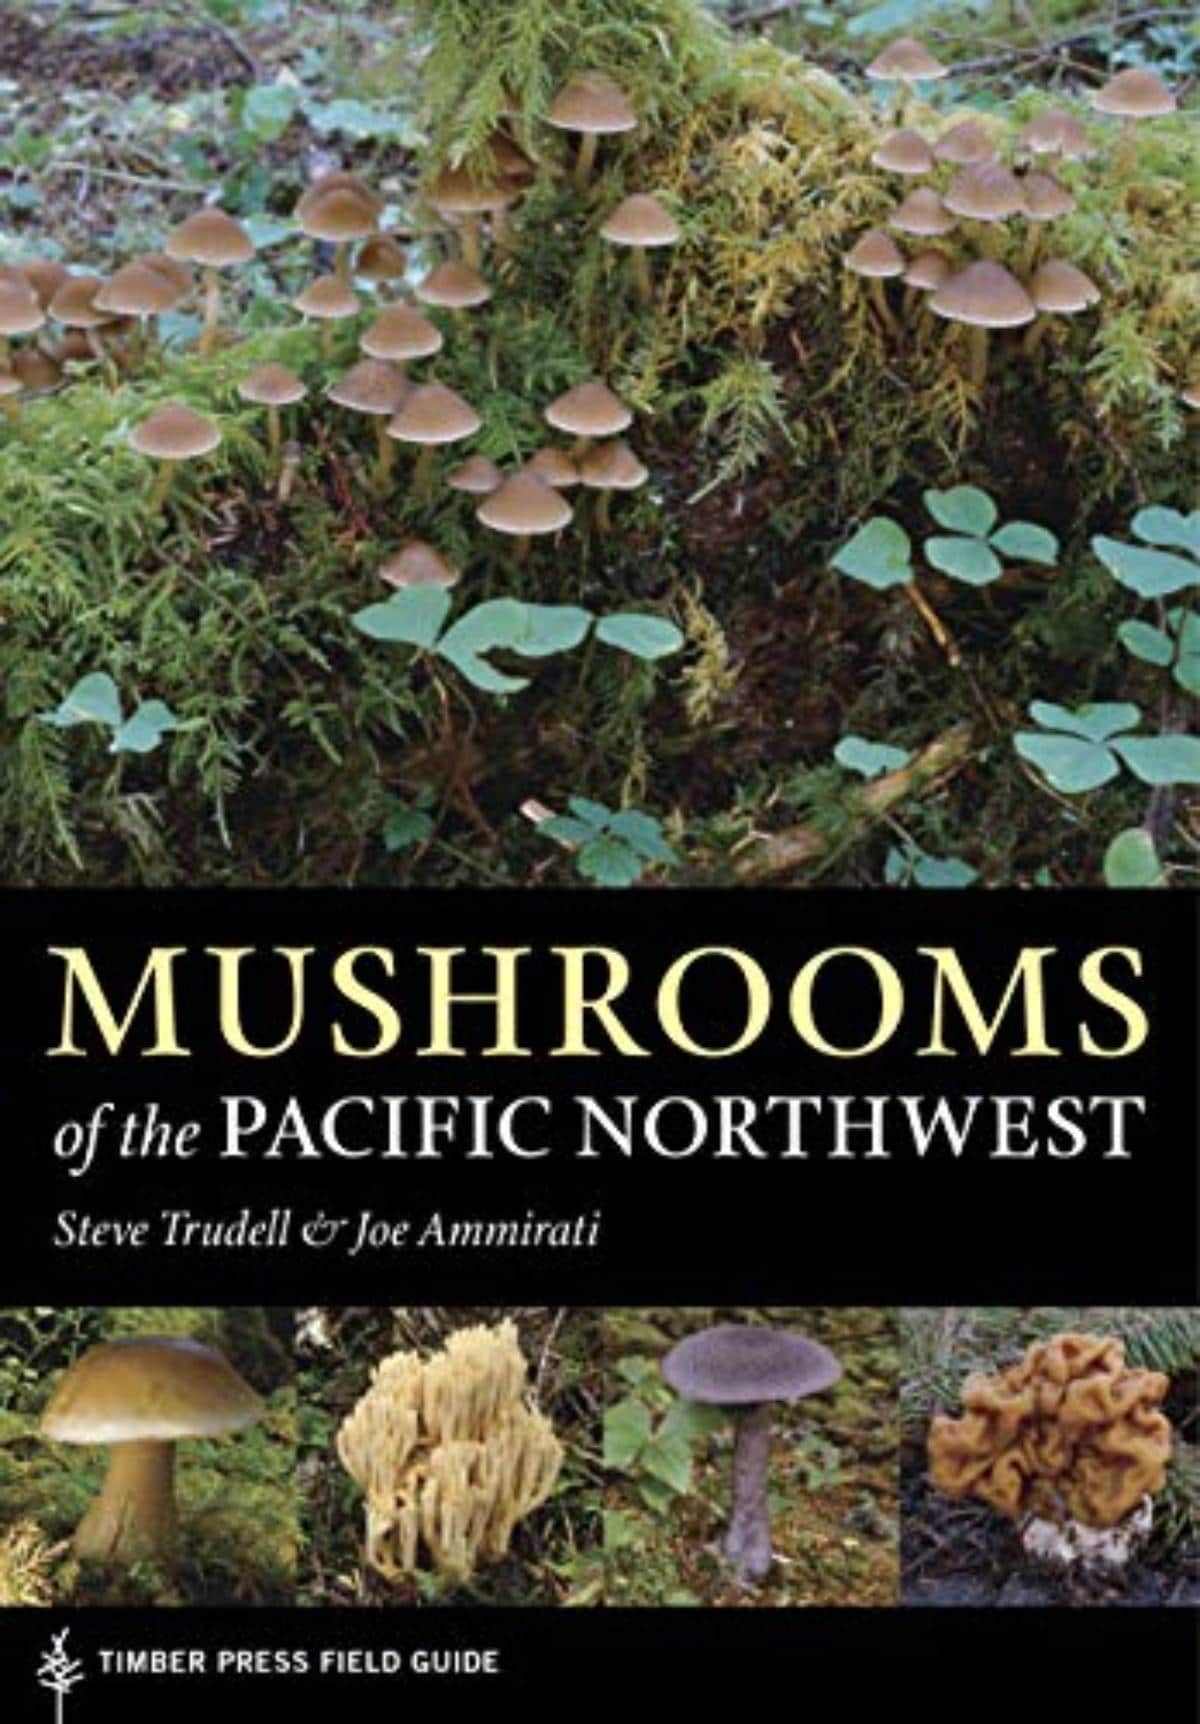 Edible Wild Plants and Mushrooms - Recipes and Guides